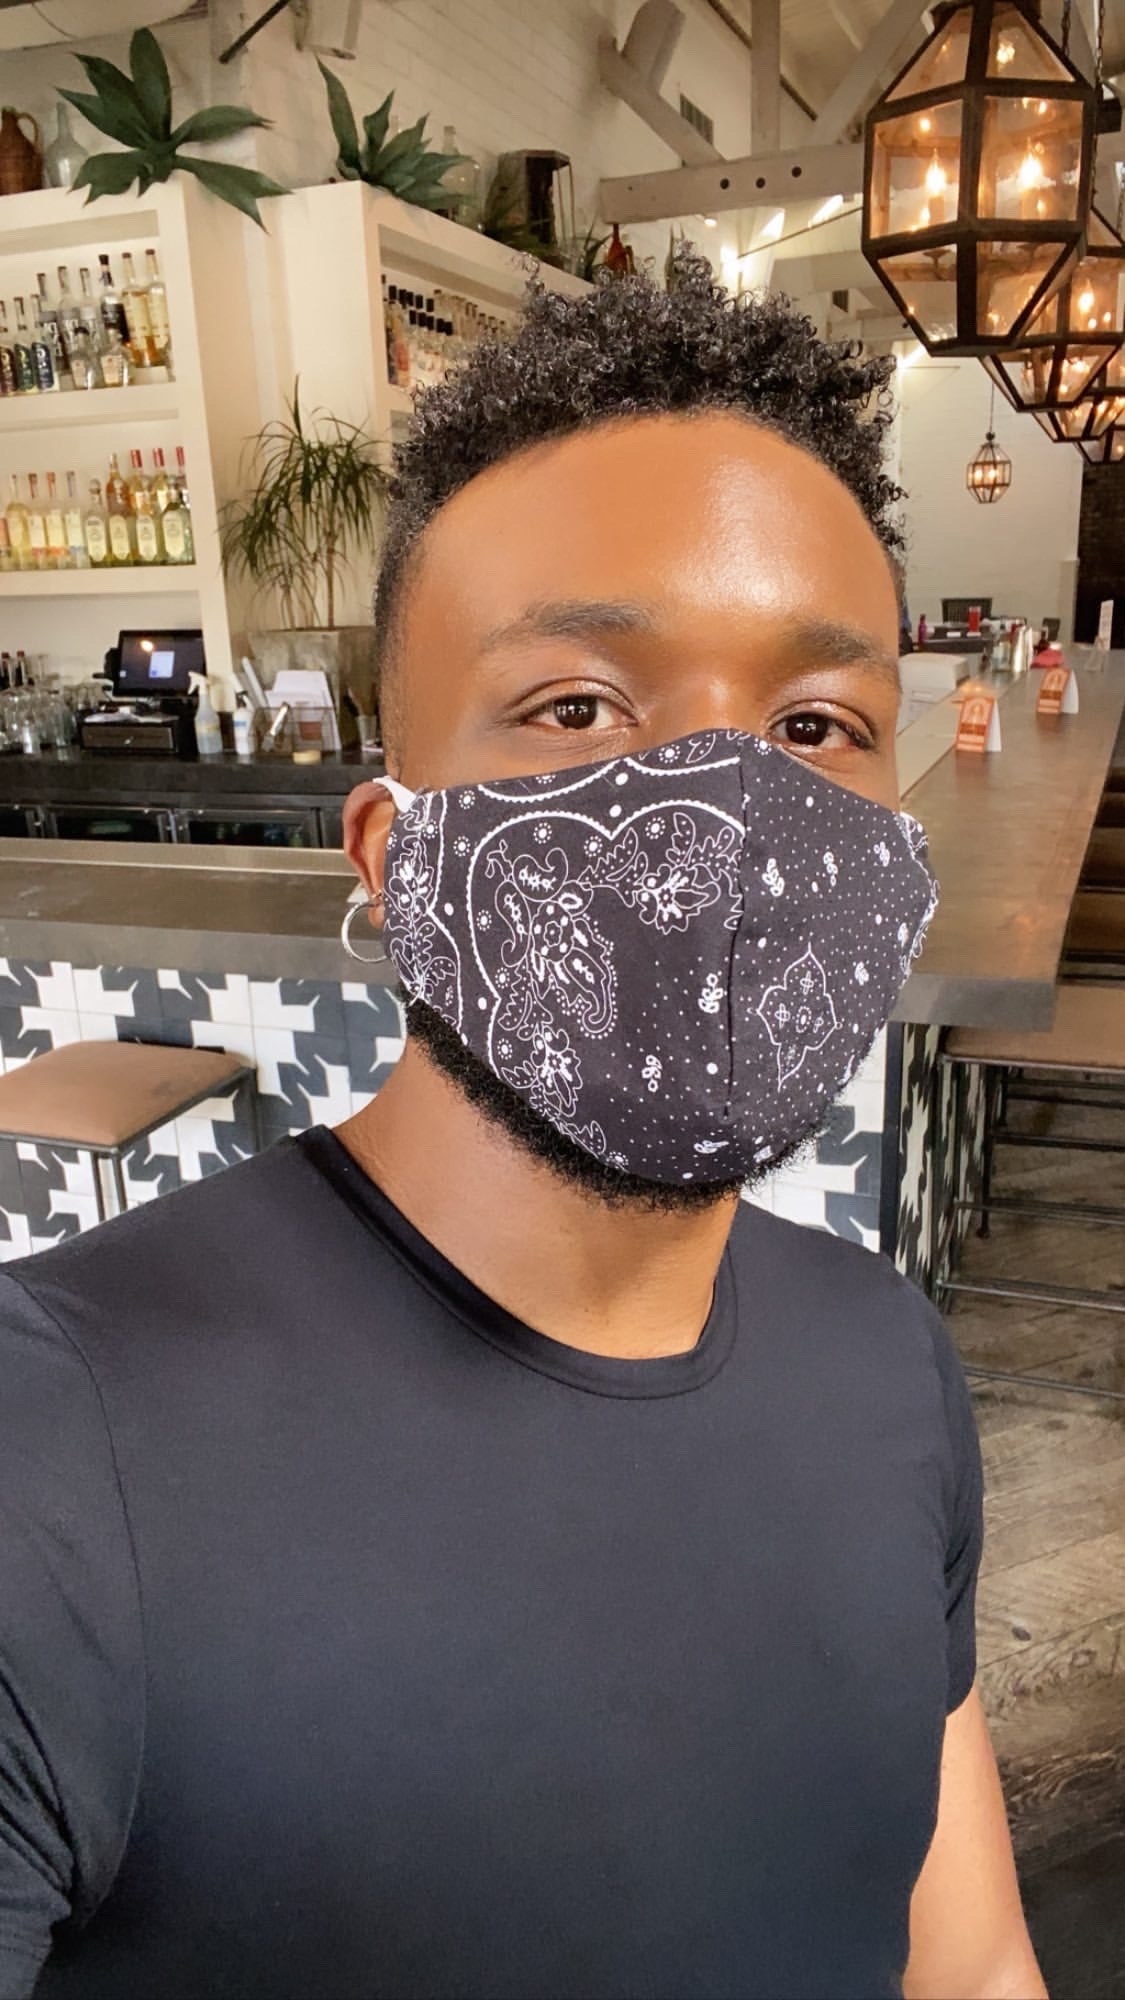 A person taking a selfie while wearing a simple paisley-print mask